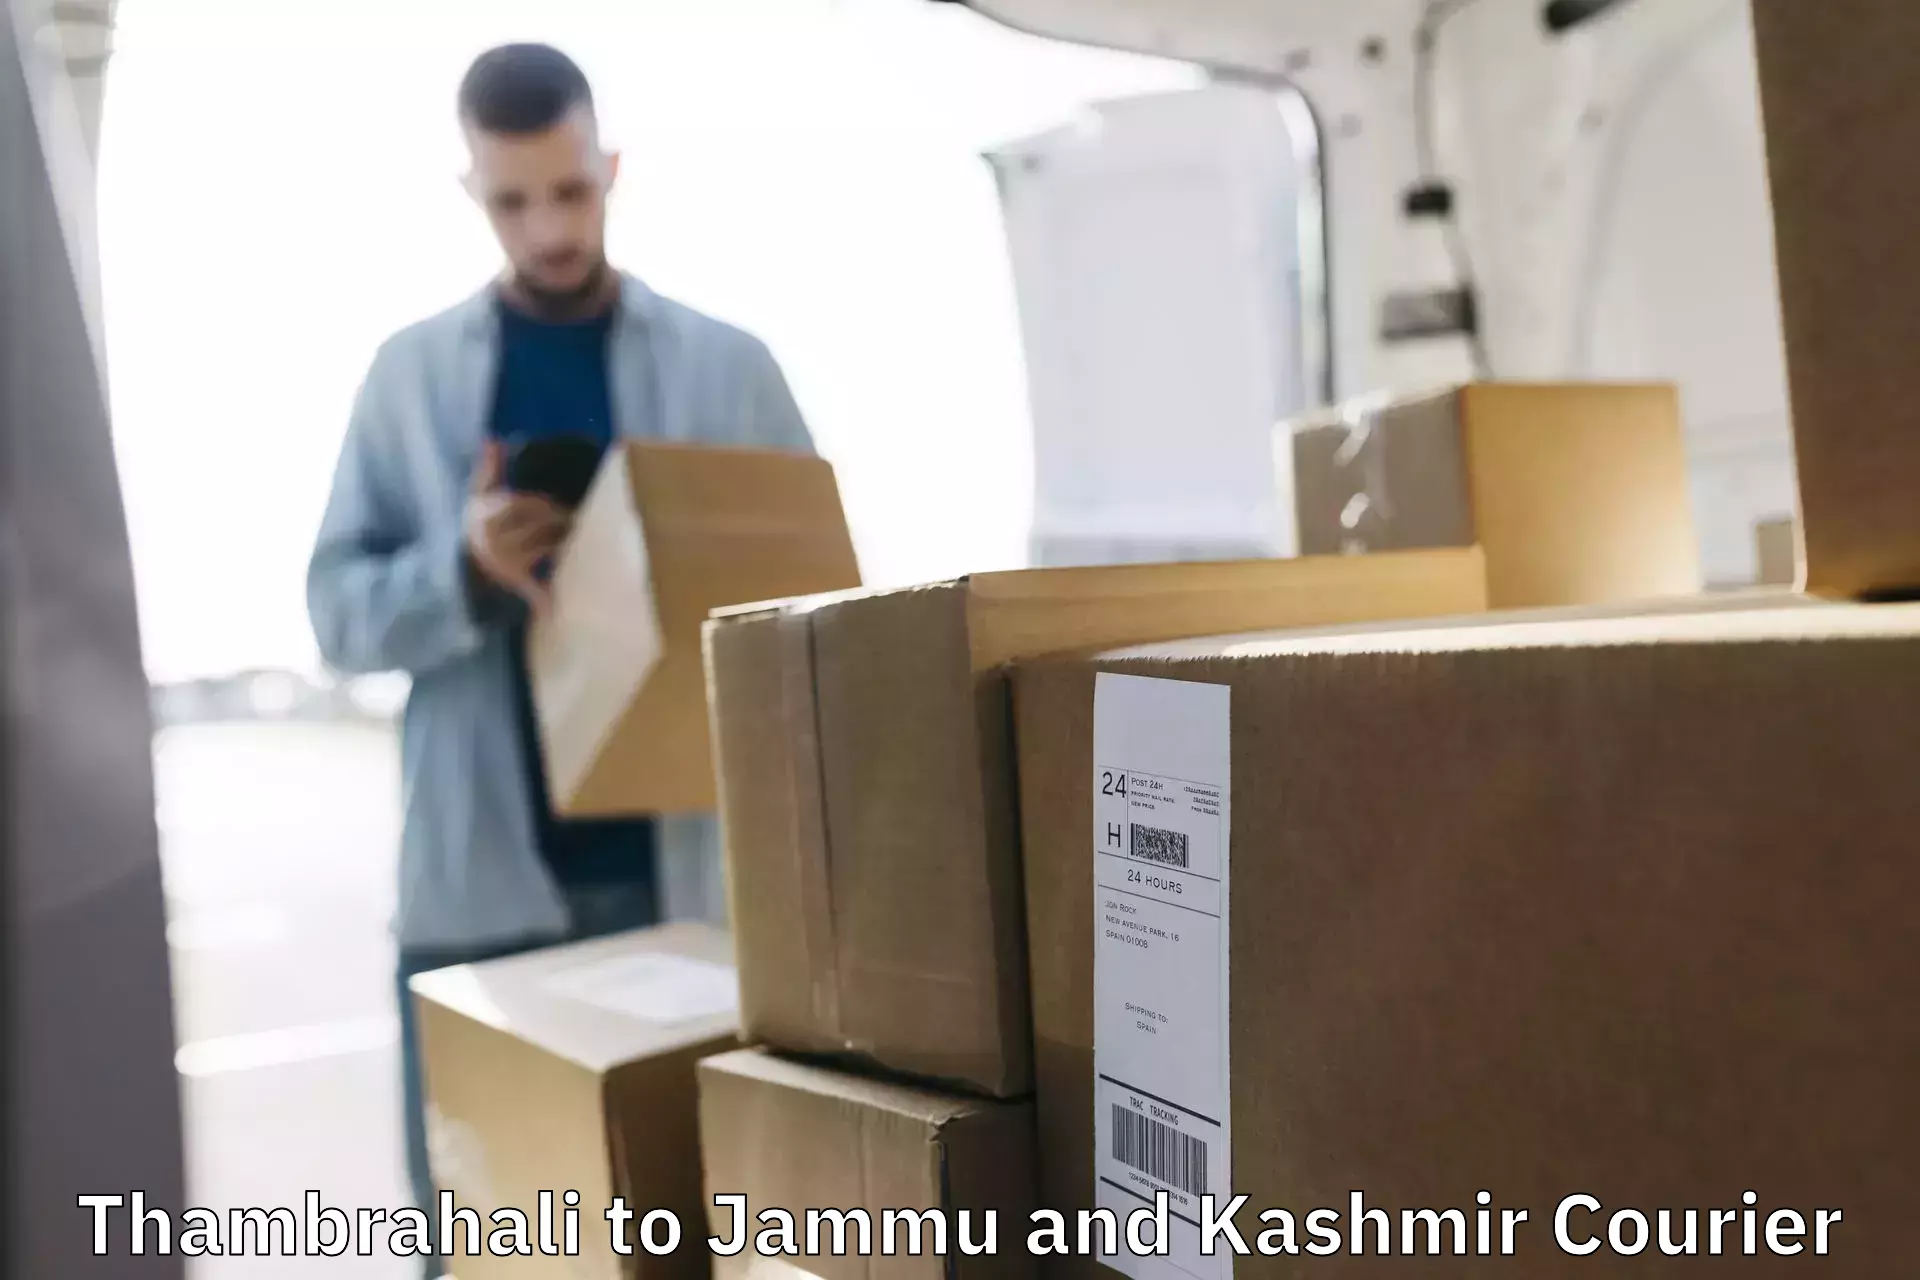 Business delivery service Thambrahali to Baramulla